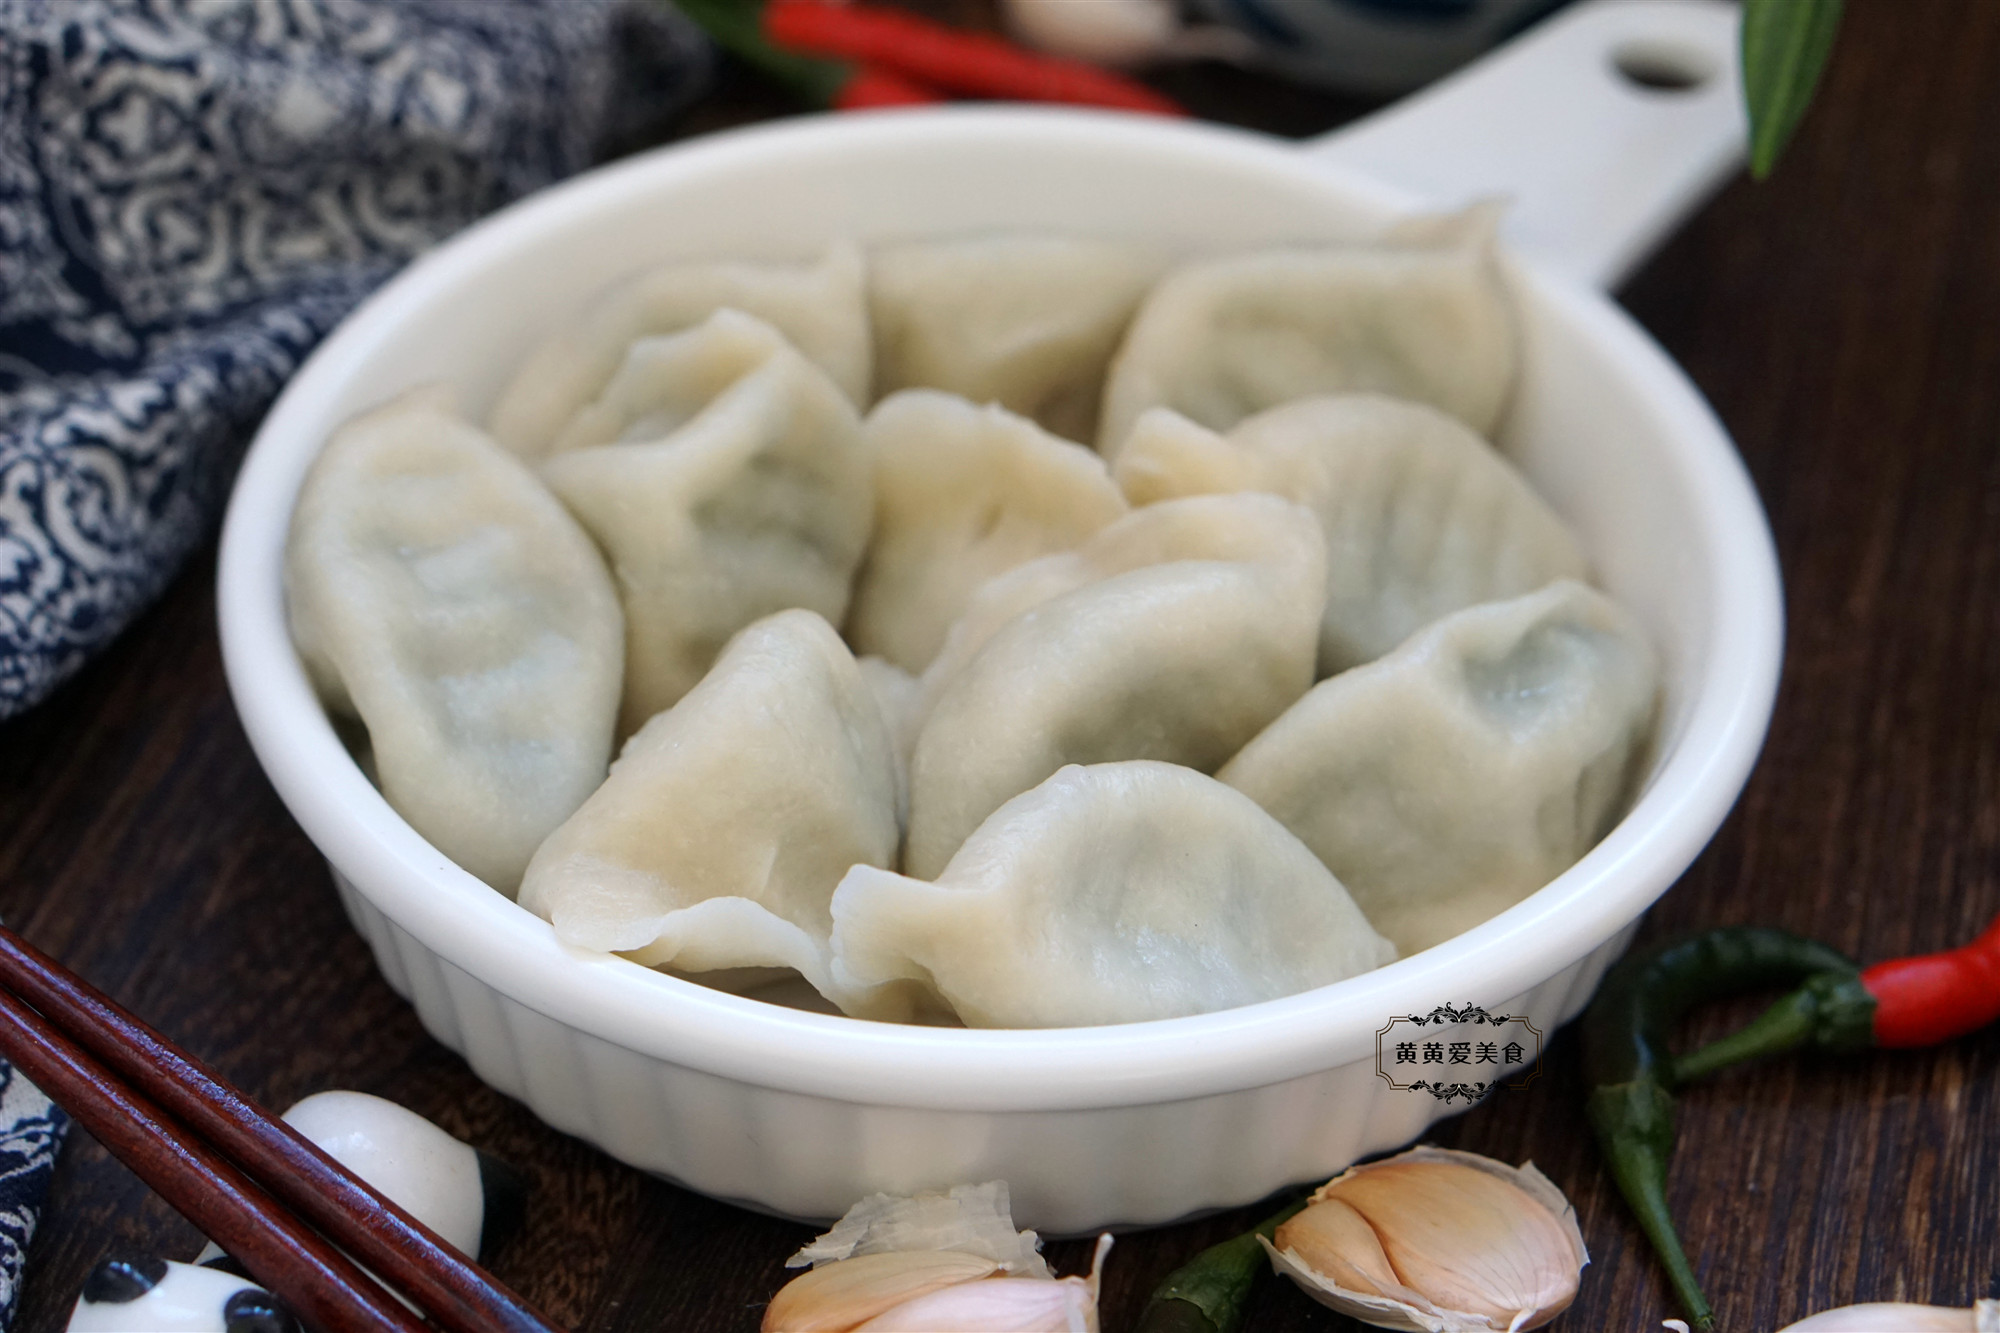 
The practice of smooth fish dumpling, how is smooth fish dumpling done delicious